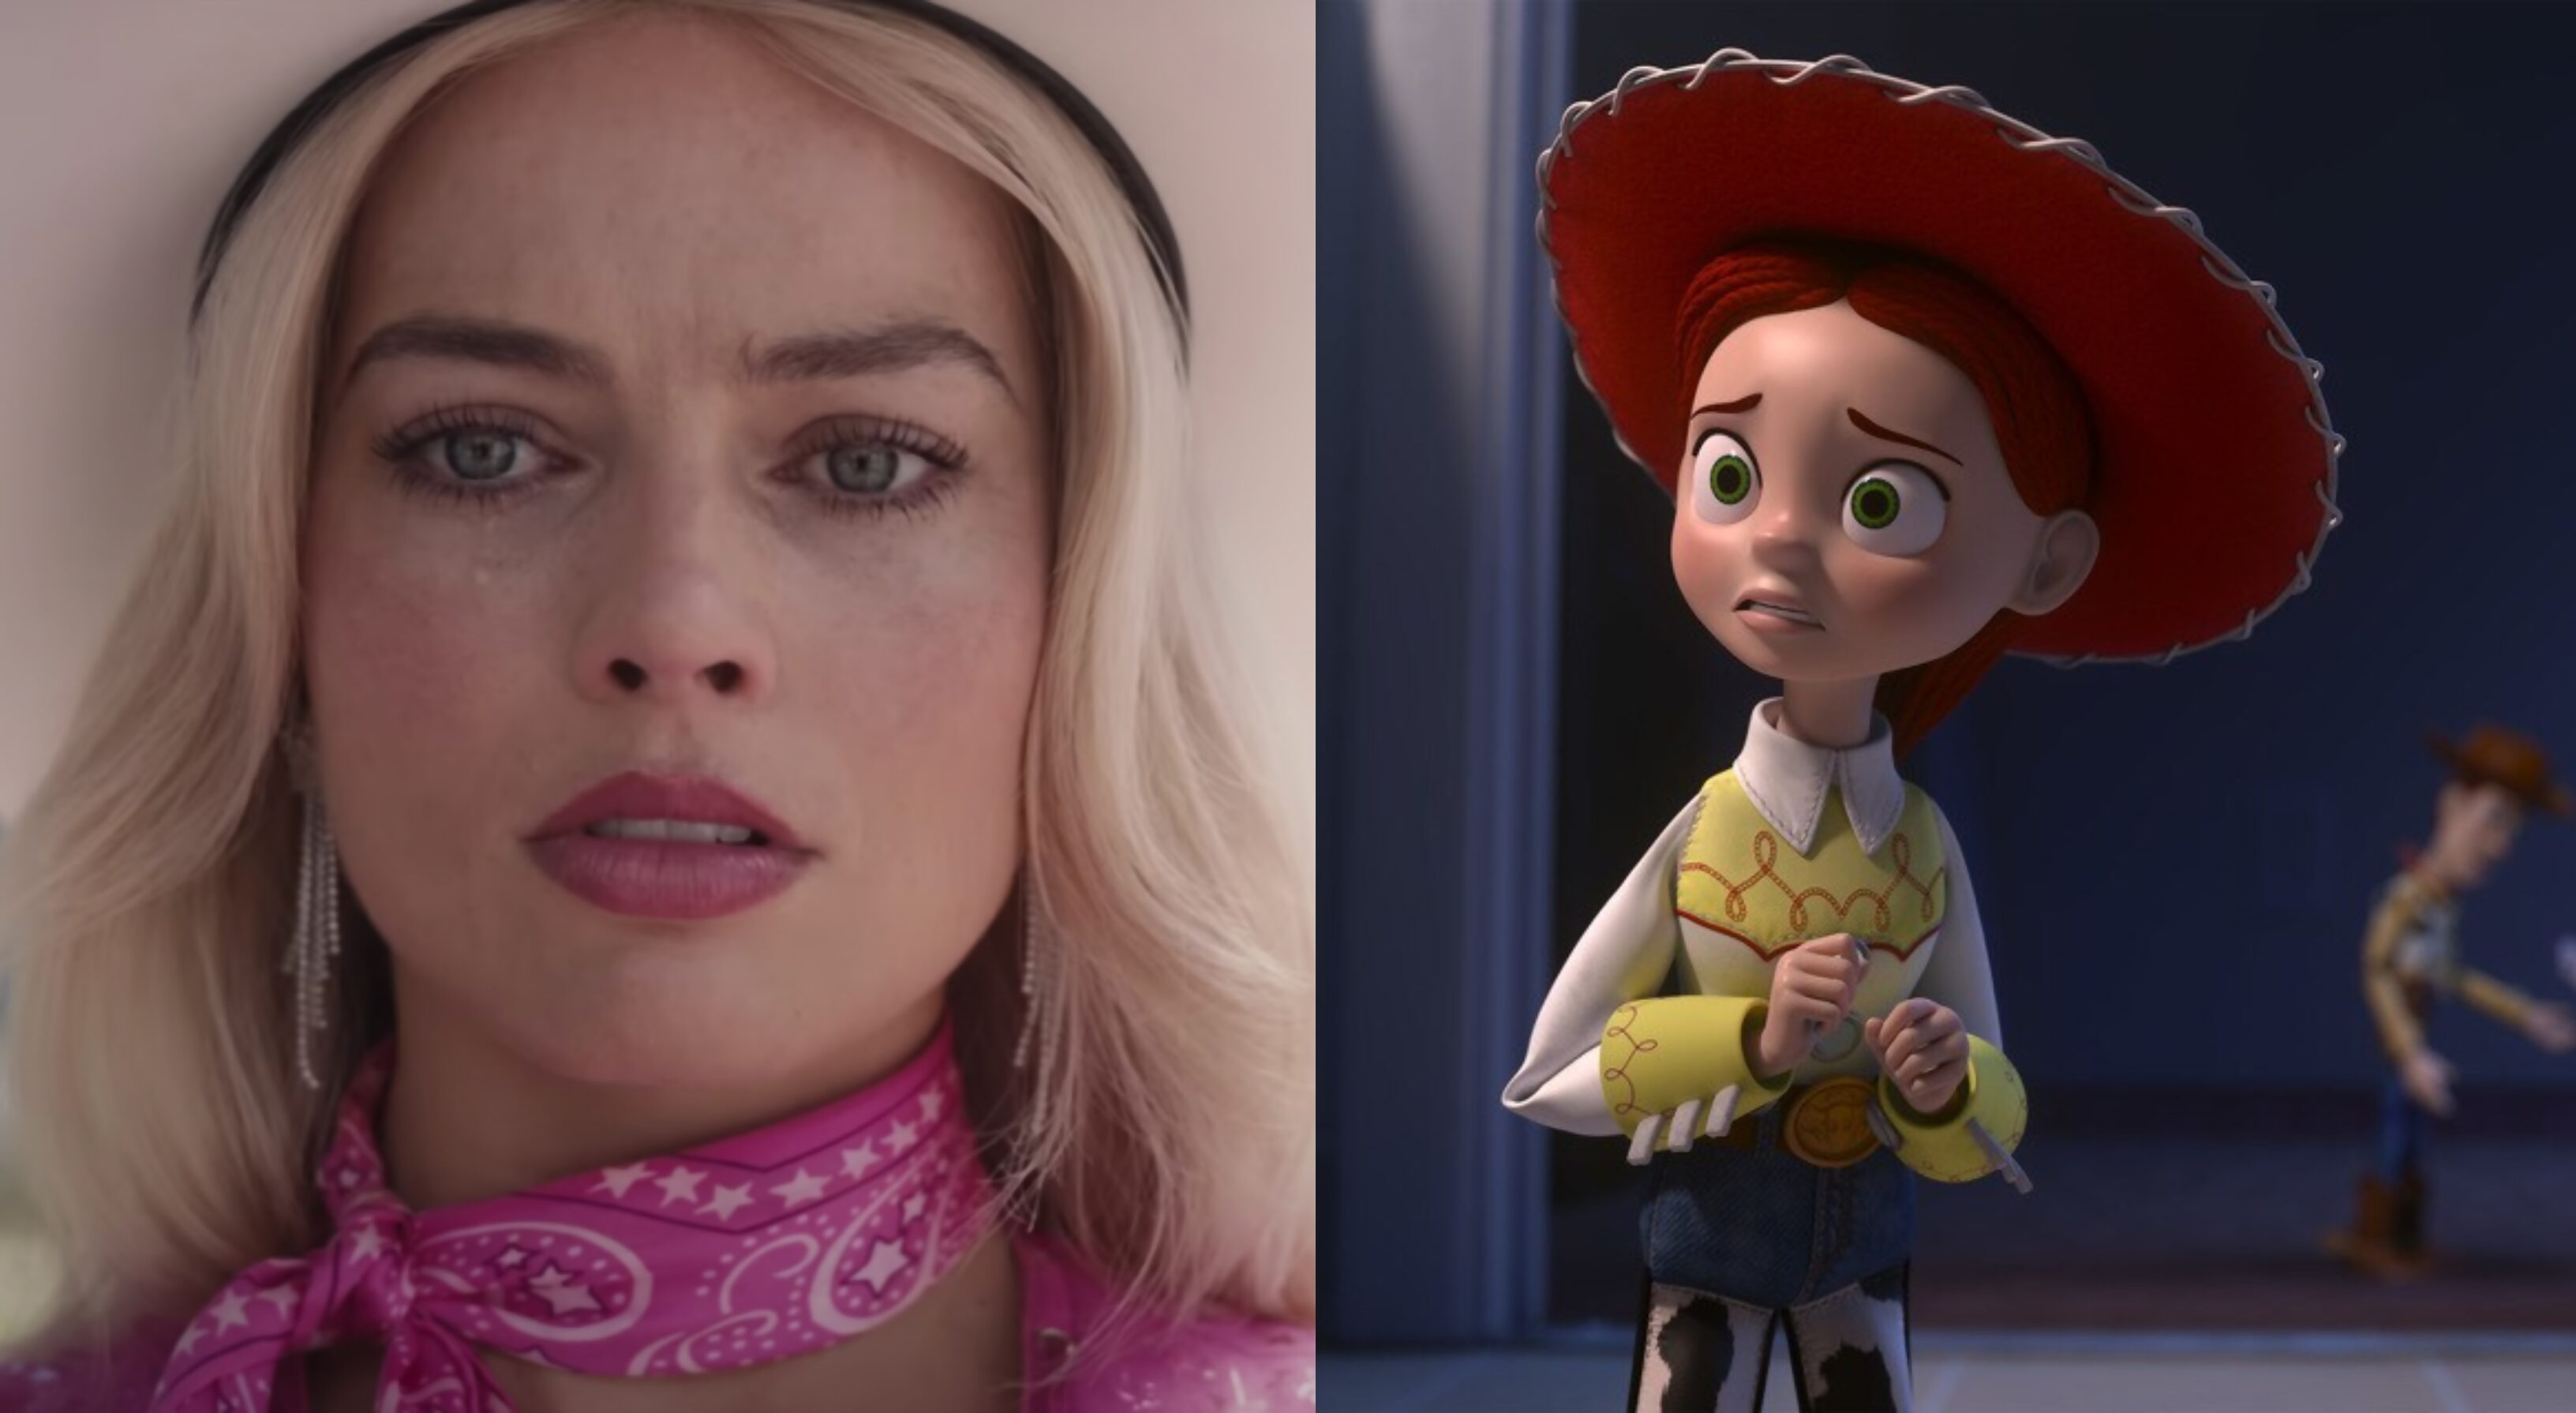 The surprising parallel between Toy Story 2 and Barbie is an ode to childhood playtime